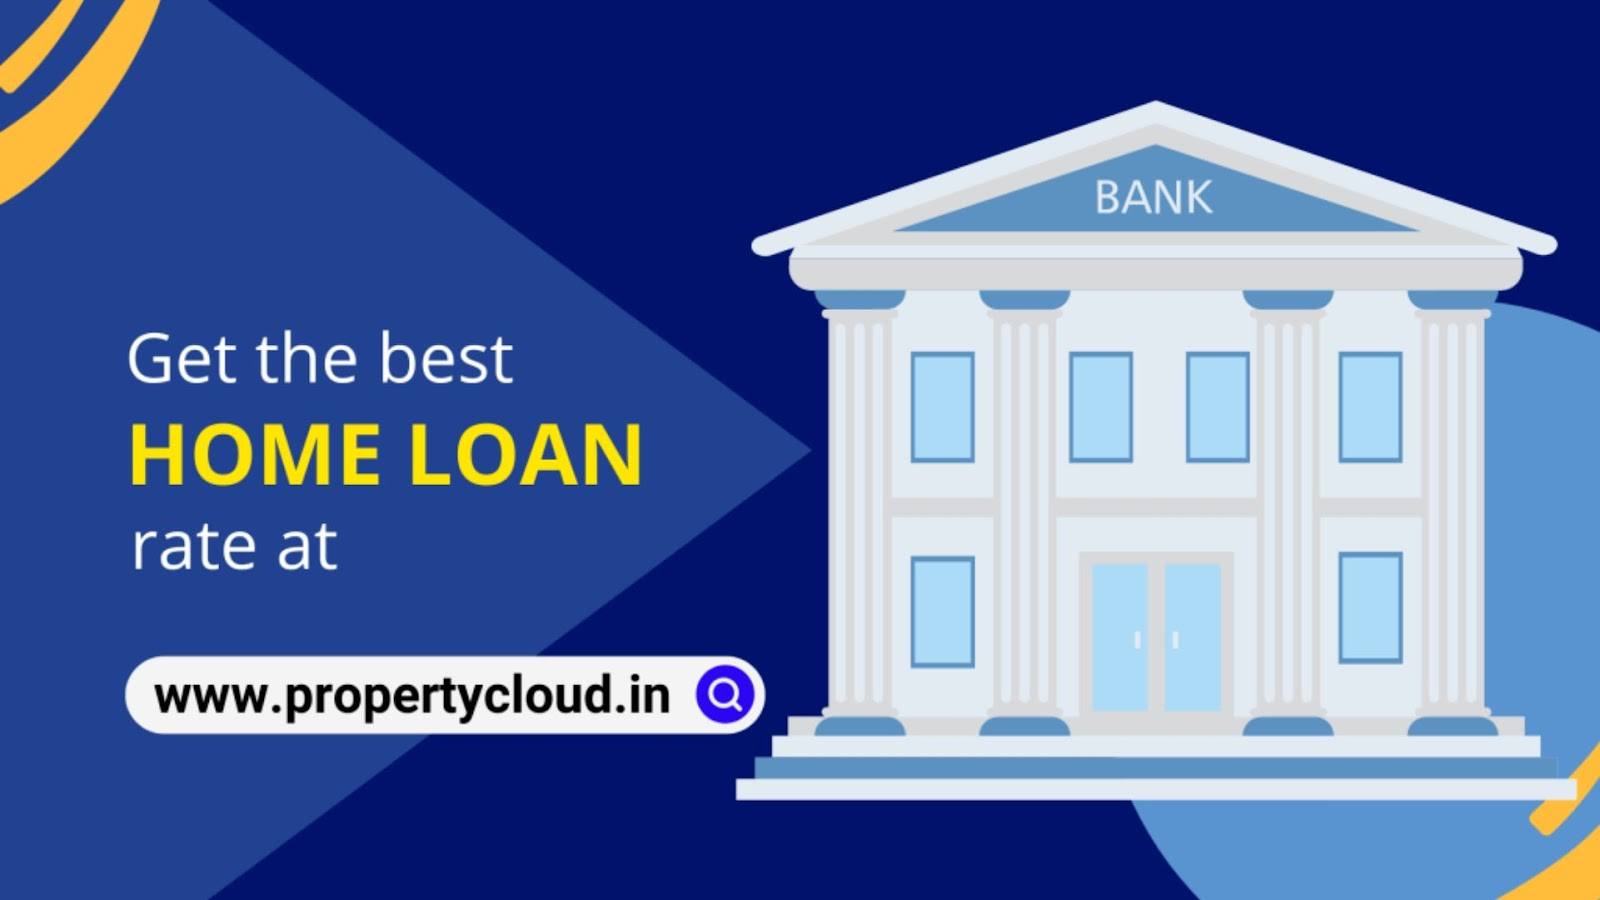 Contact PropertyCloud loan professionals for the greatest funding and tax guidance.